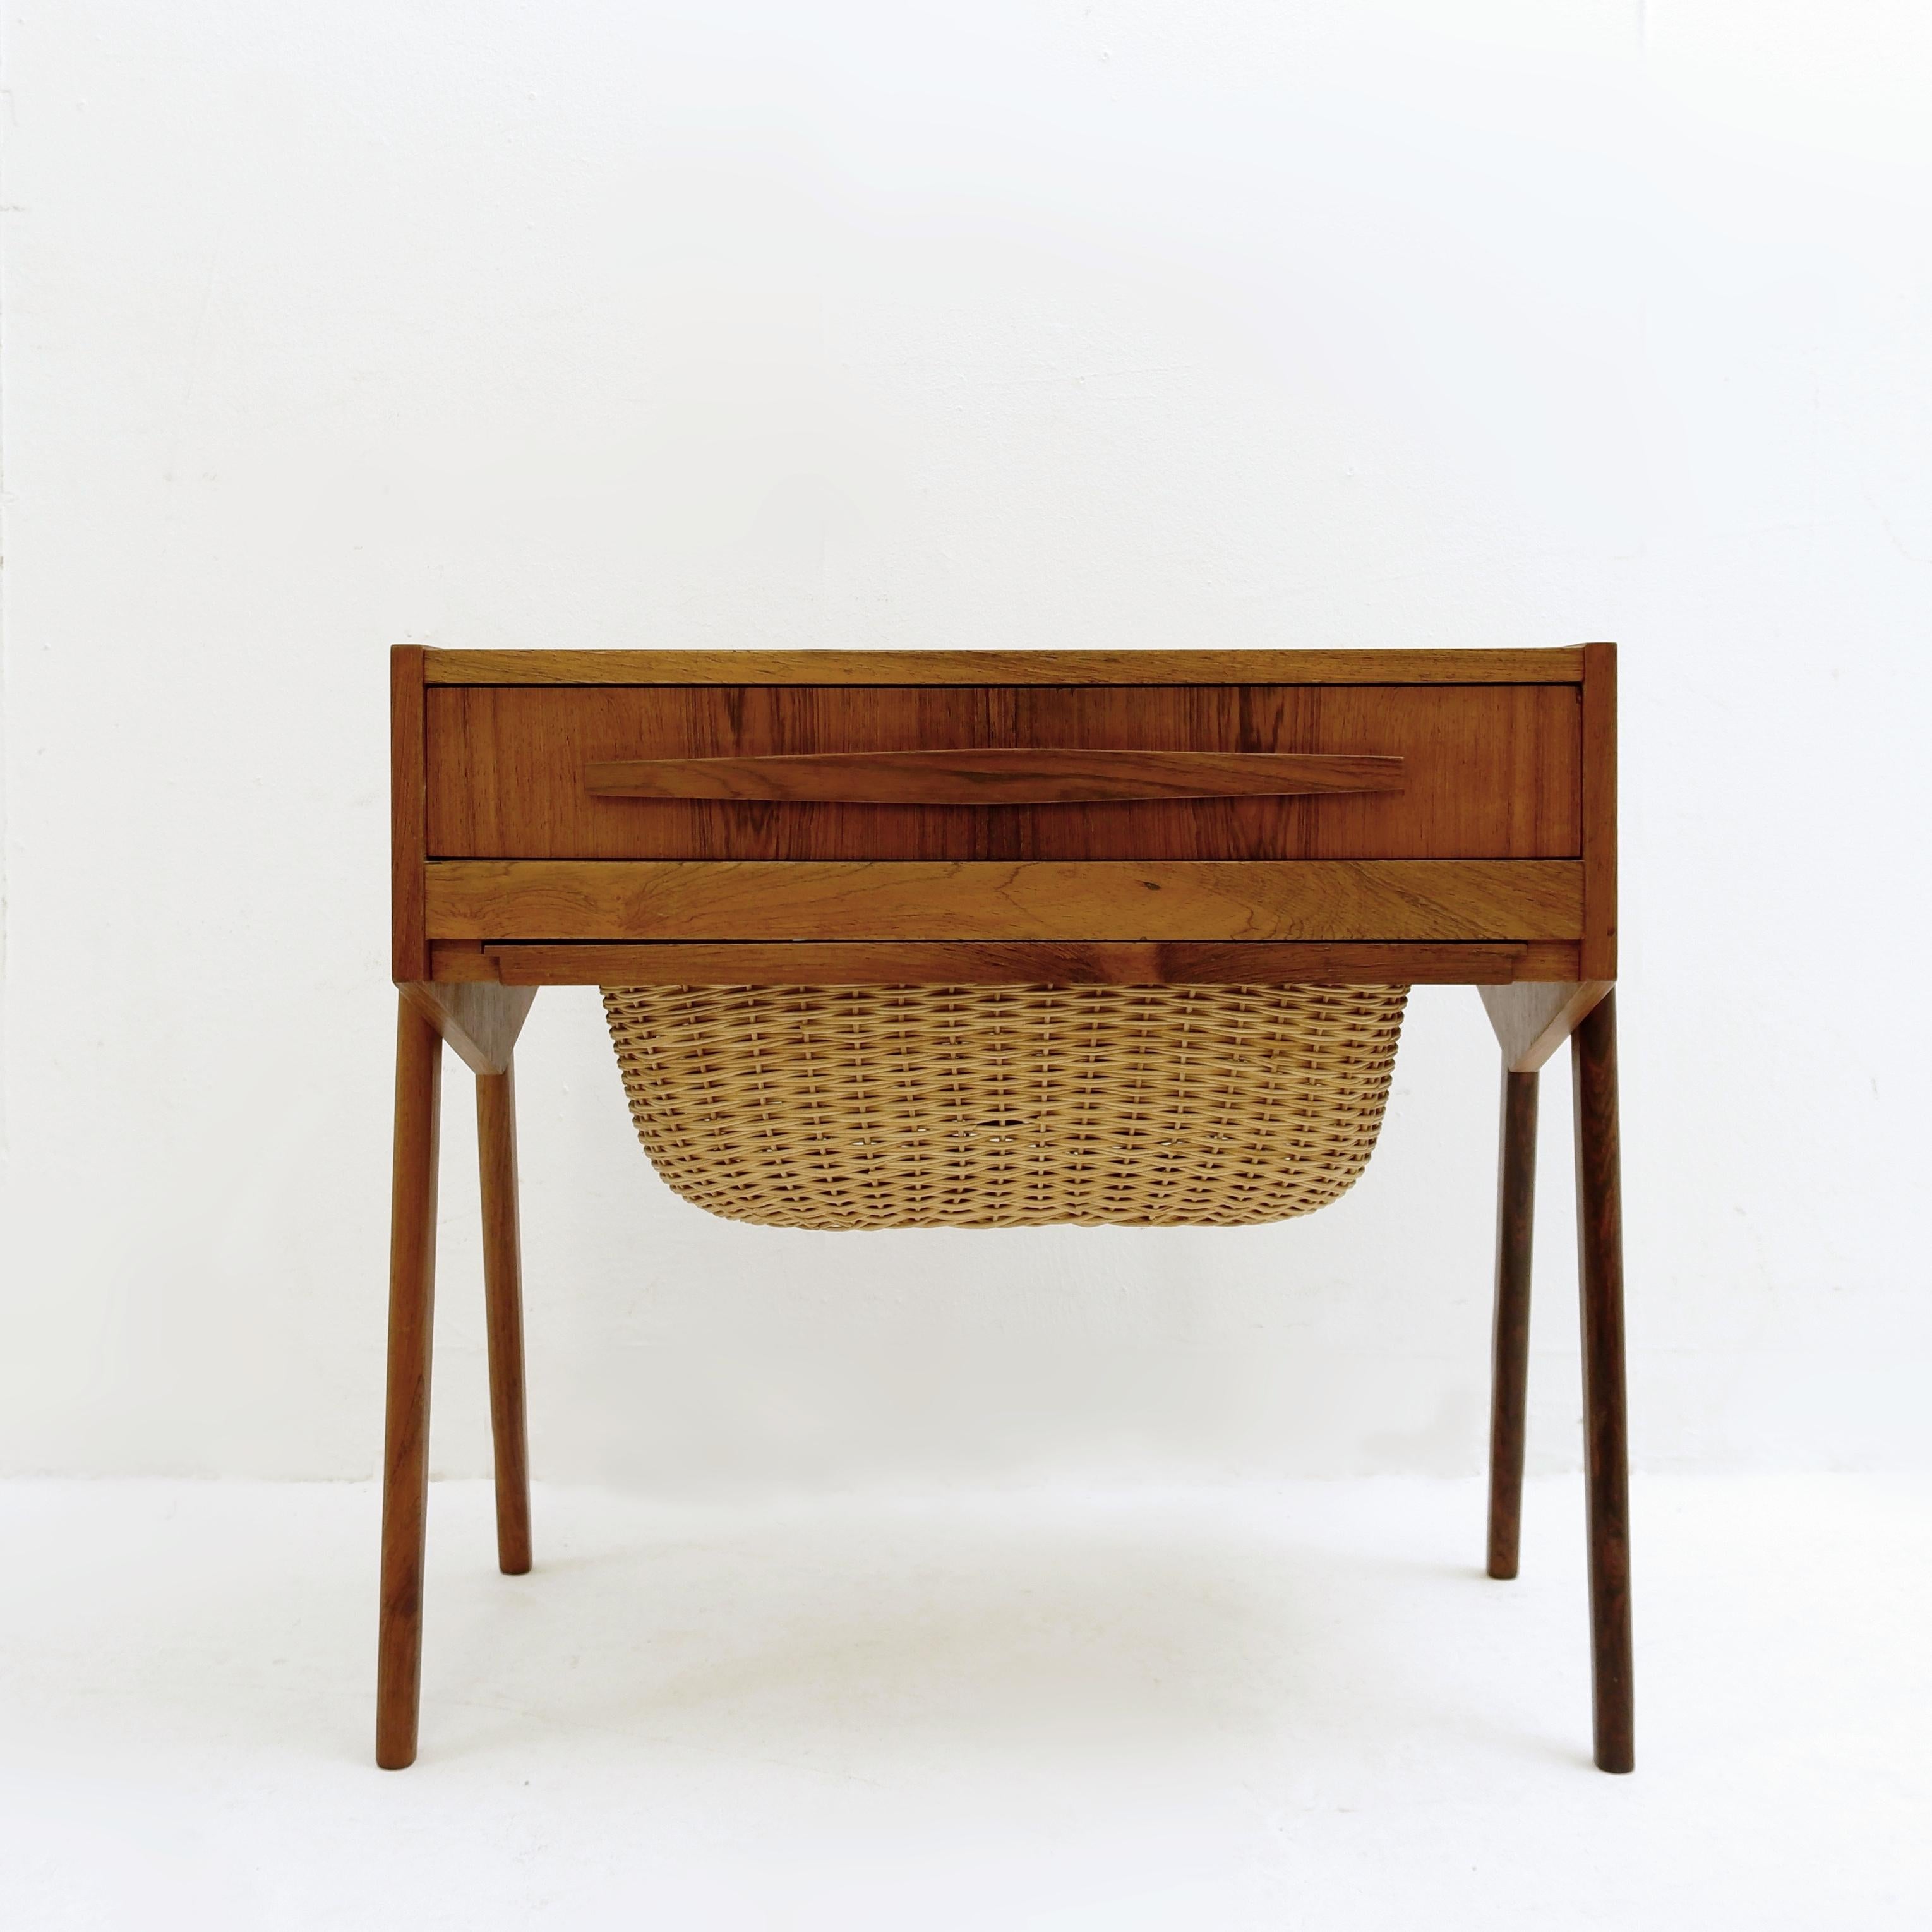 Midcentury Danish Sewing Box - side table - 1970s.